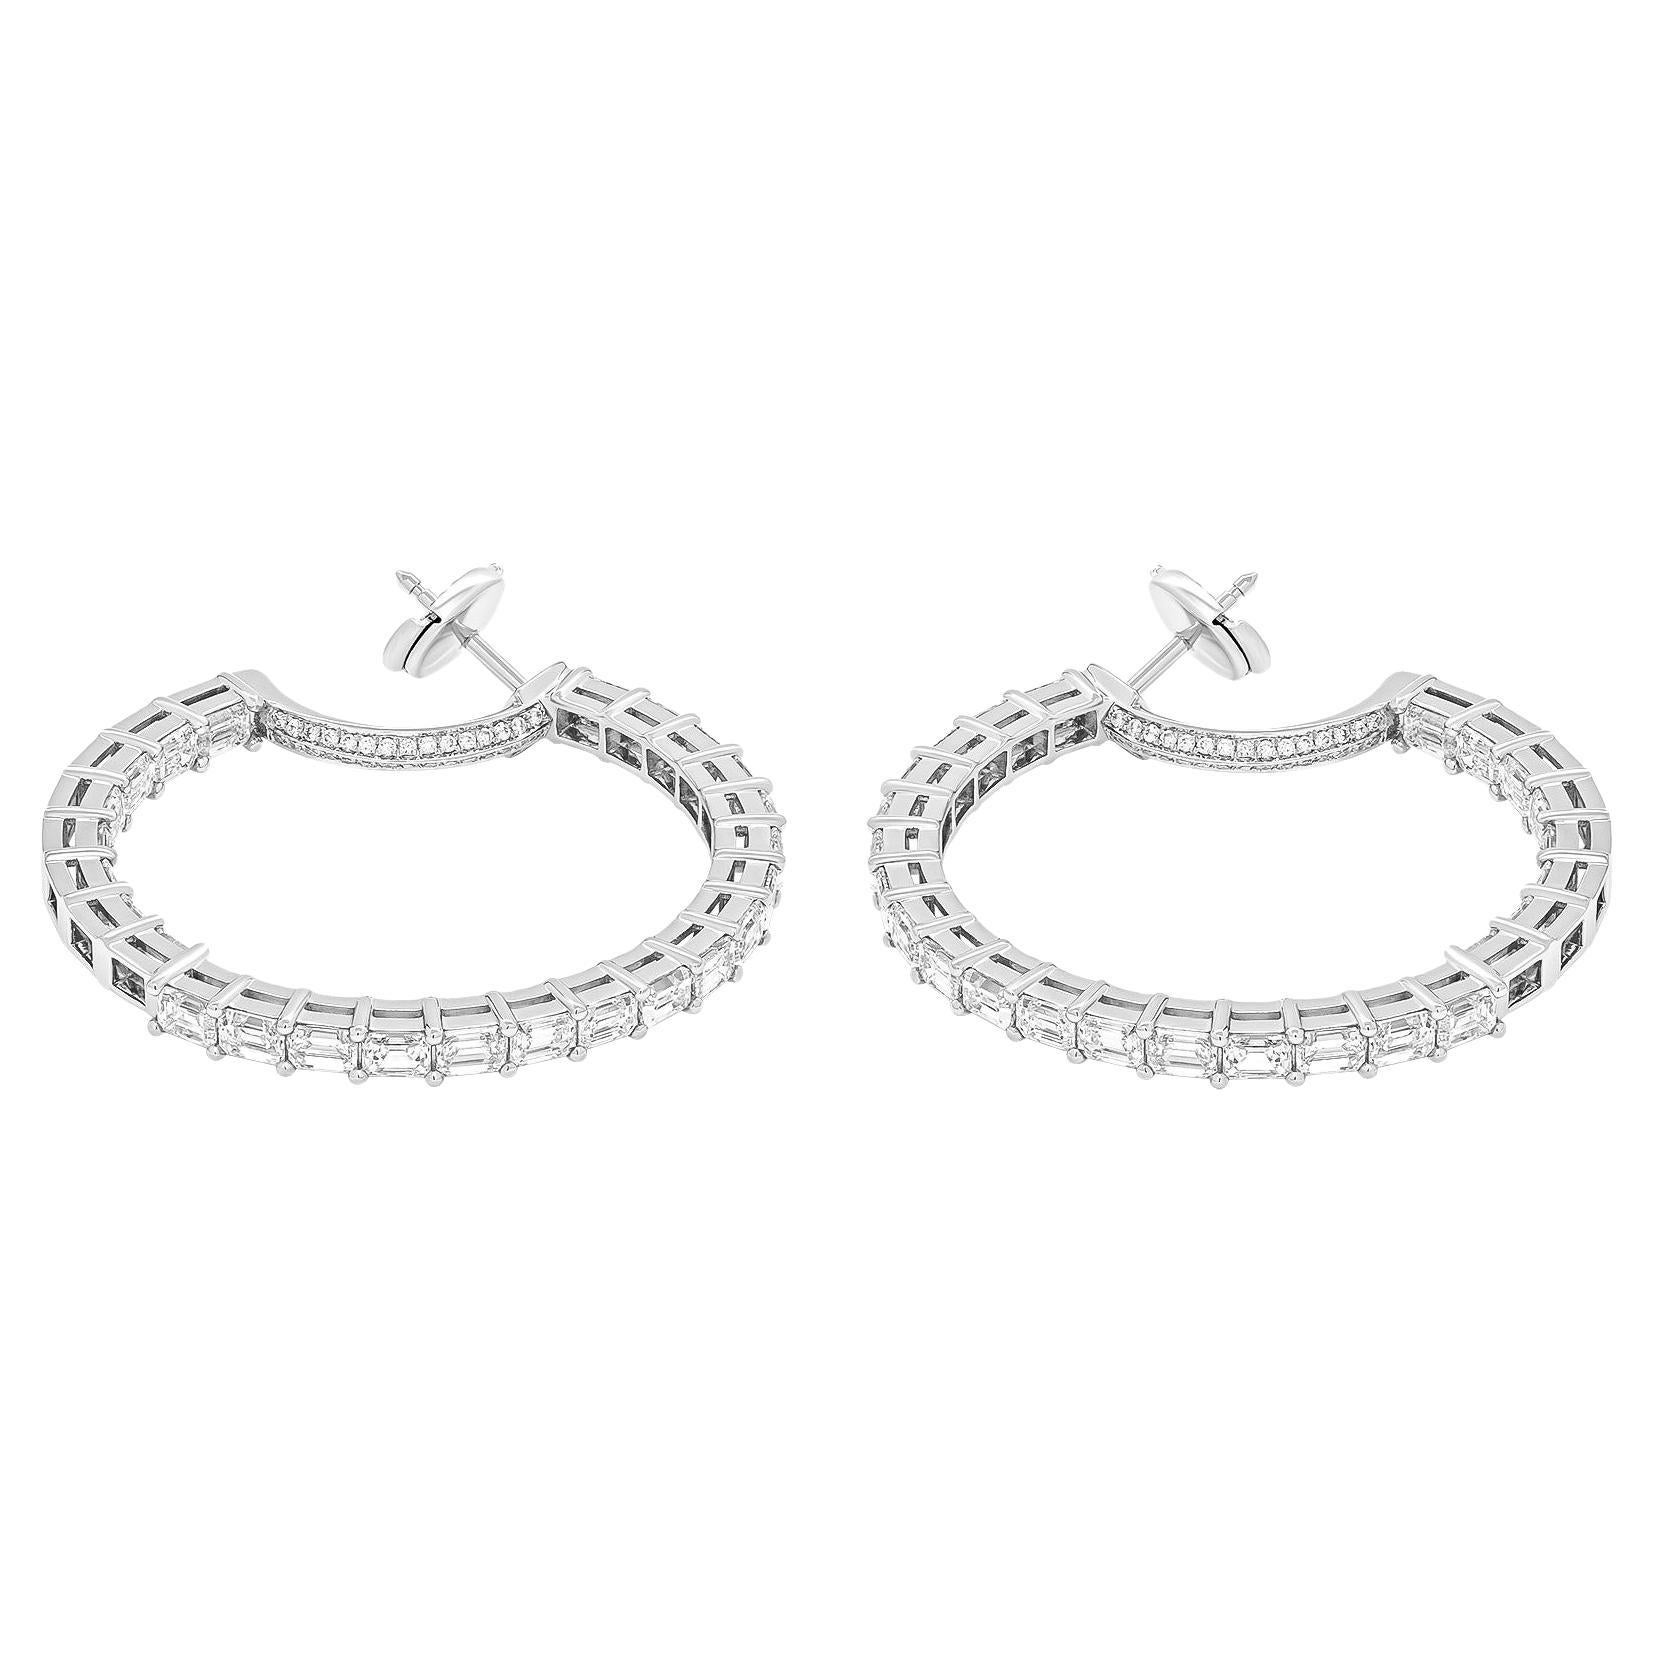 Hoop earrings in 18K White Gold
1.5 inches diameter
50 stones Emerald VVS1 Shape Diamonds 0.15ct each stone
TCW:7.70ct
TCW pave: 0.26ct 
